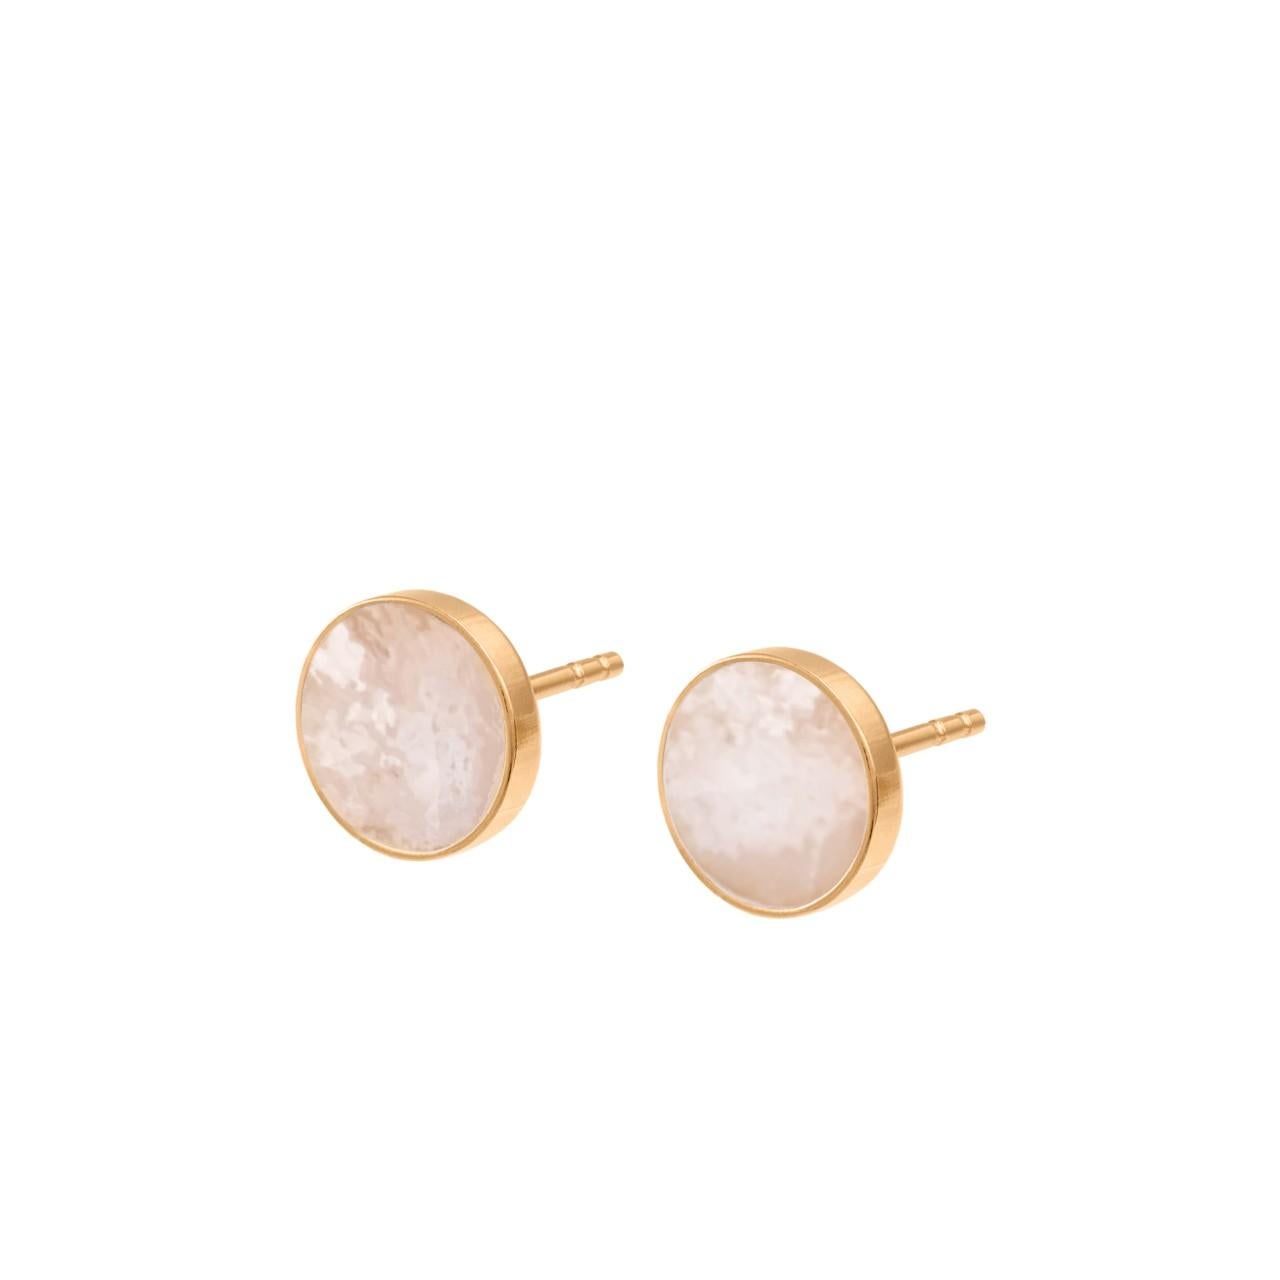 Classic earrings studs with a white stone are a great addition to a timeless capsule wardrobe. You can wear them with absolutely any outfit. They are not only stylish but also super comfy to wear. 
The stone that adorns the earring is opal - mineral